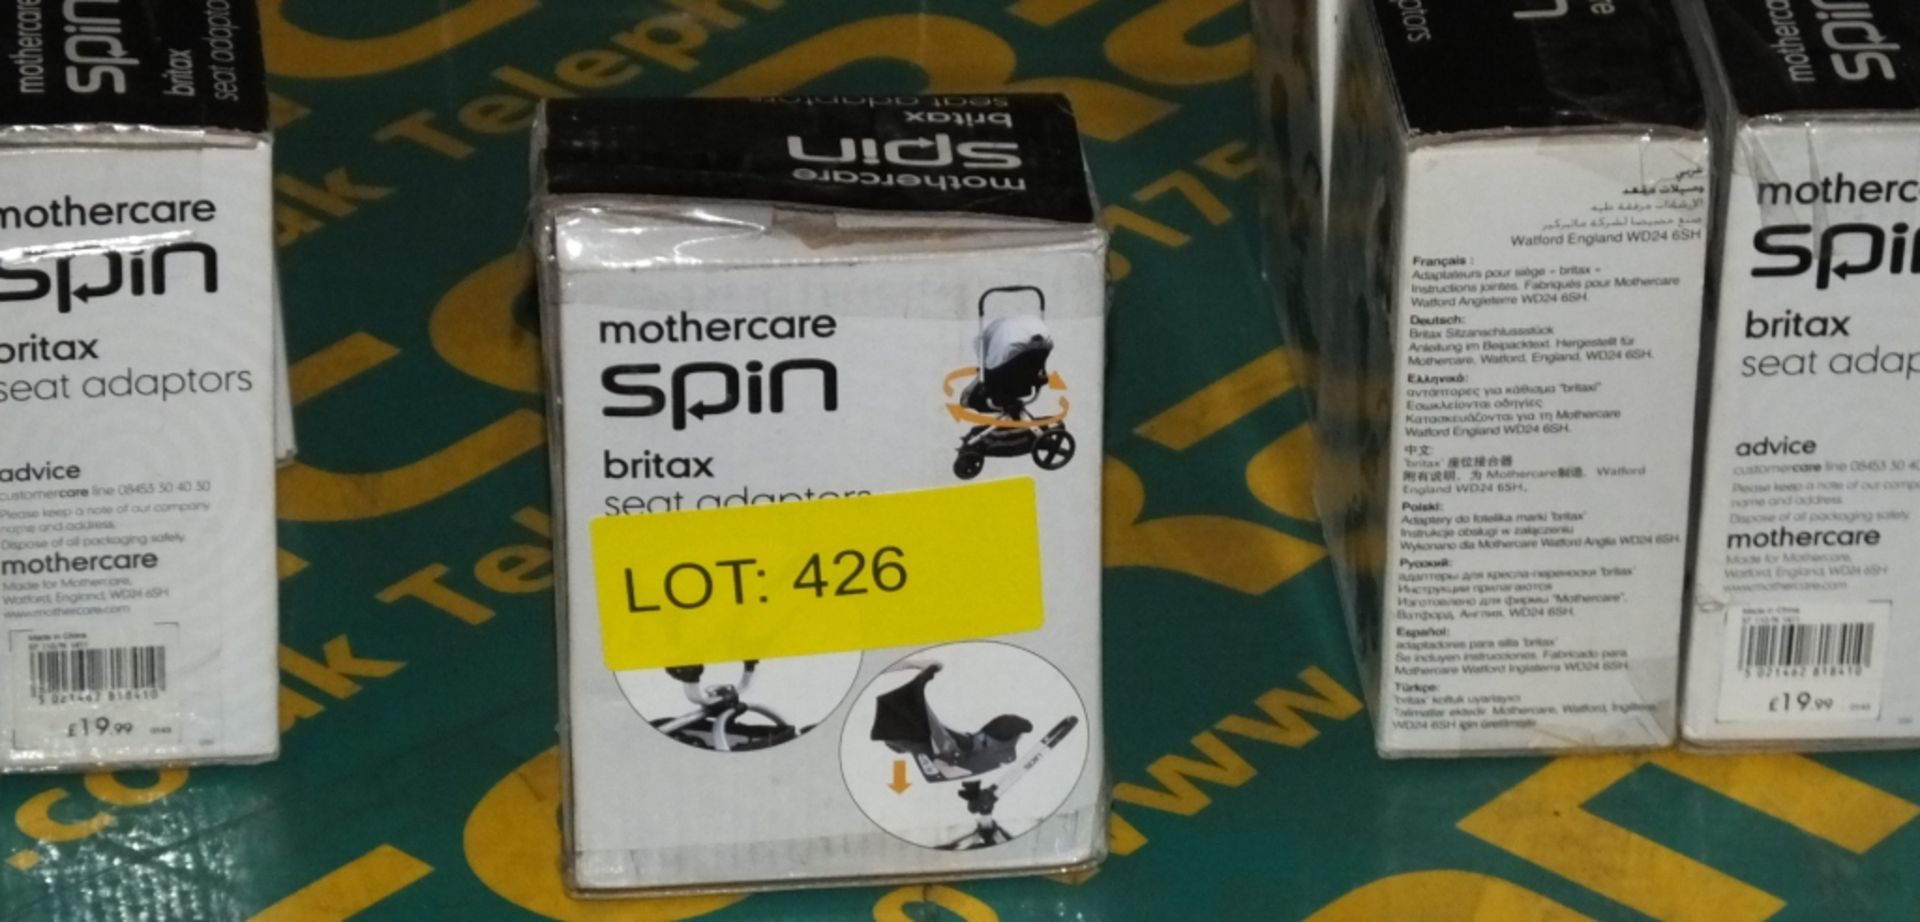 24x Mothercare Spin Britax Seat Adapters - Image 2 of 2